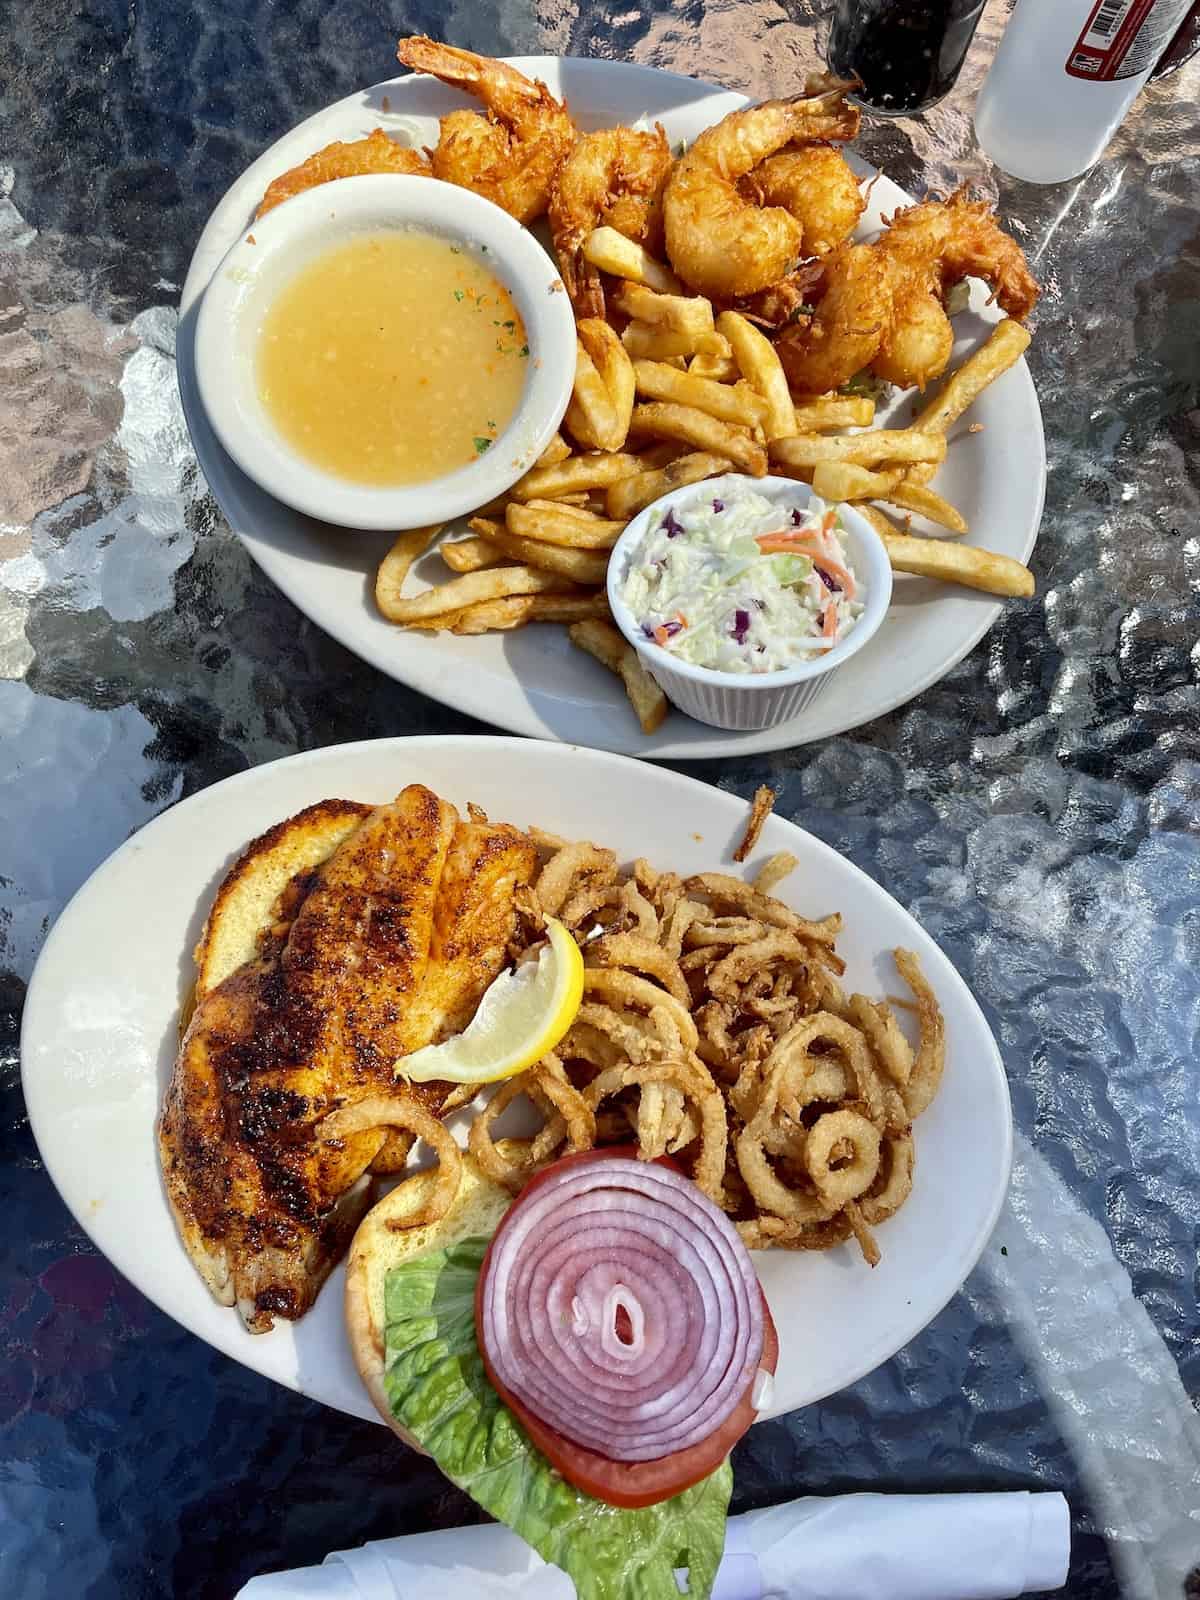 Fried shrimp with French fries and a fish sandwich with onion rings.